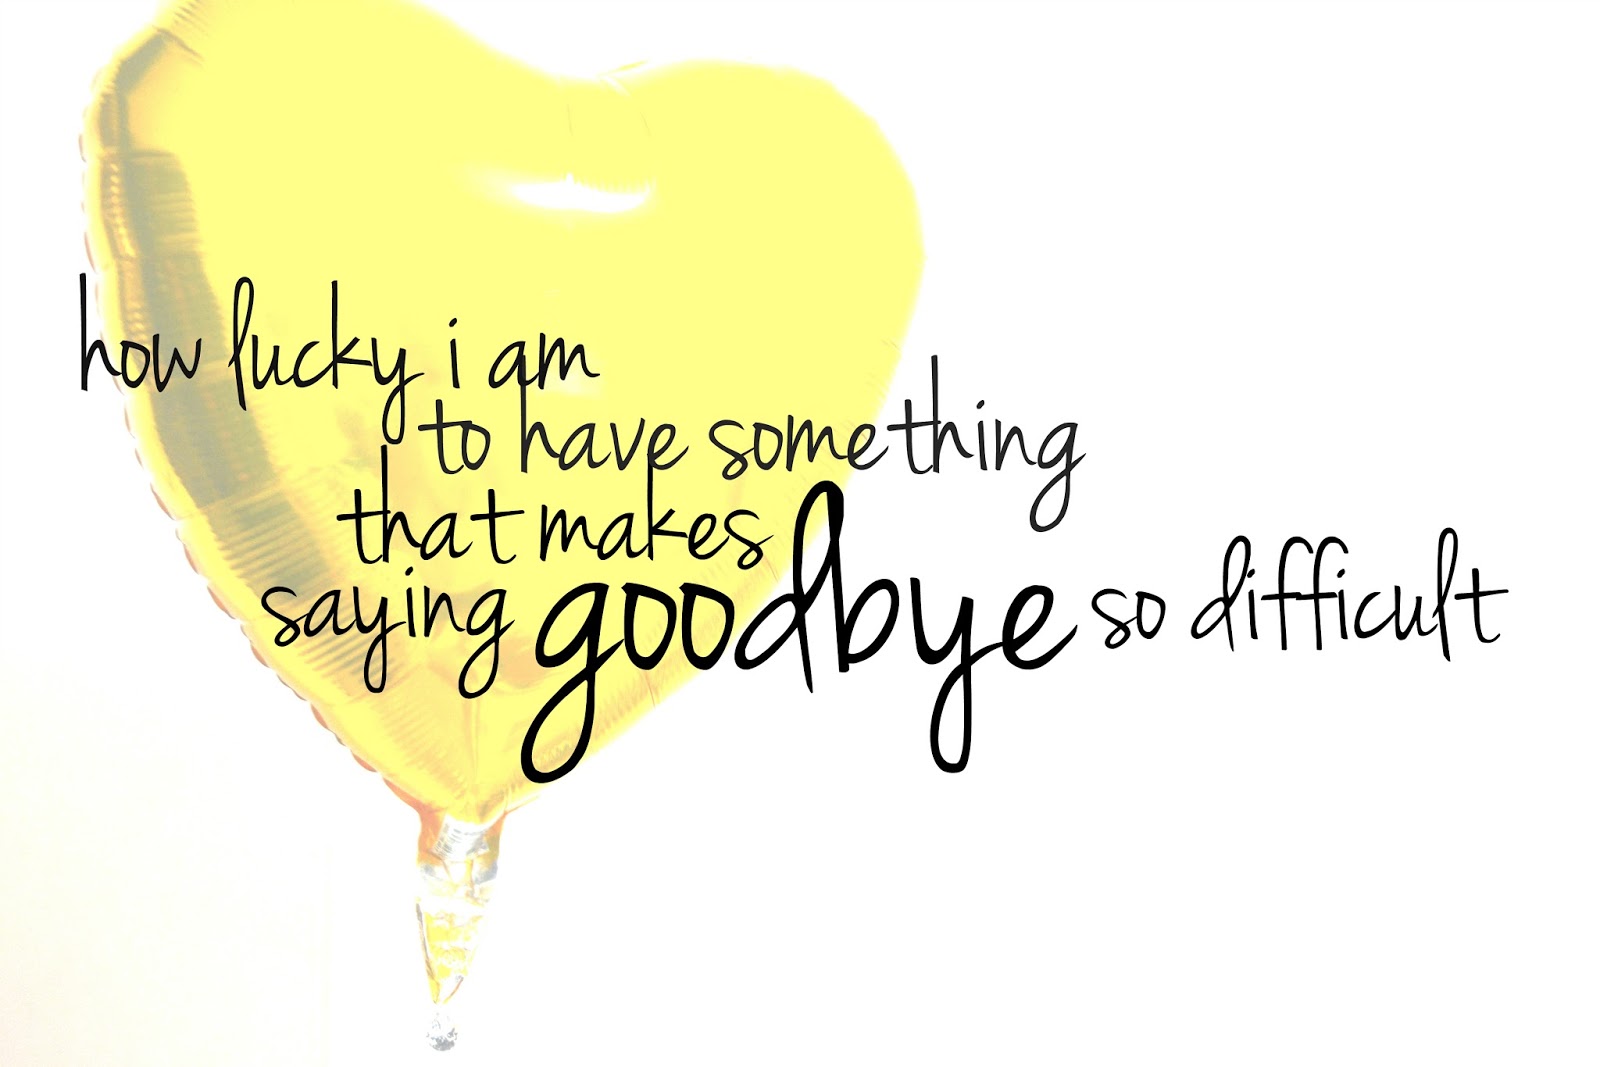 Farewell Quotes Hd Wallpaper 14 - Farewell Quotes To Colleagues - 1600x1067  Wallpaper 